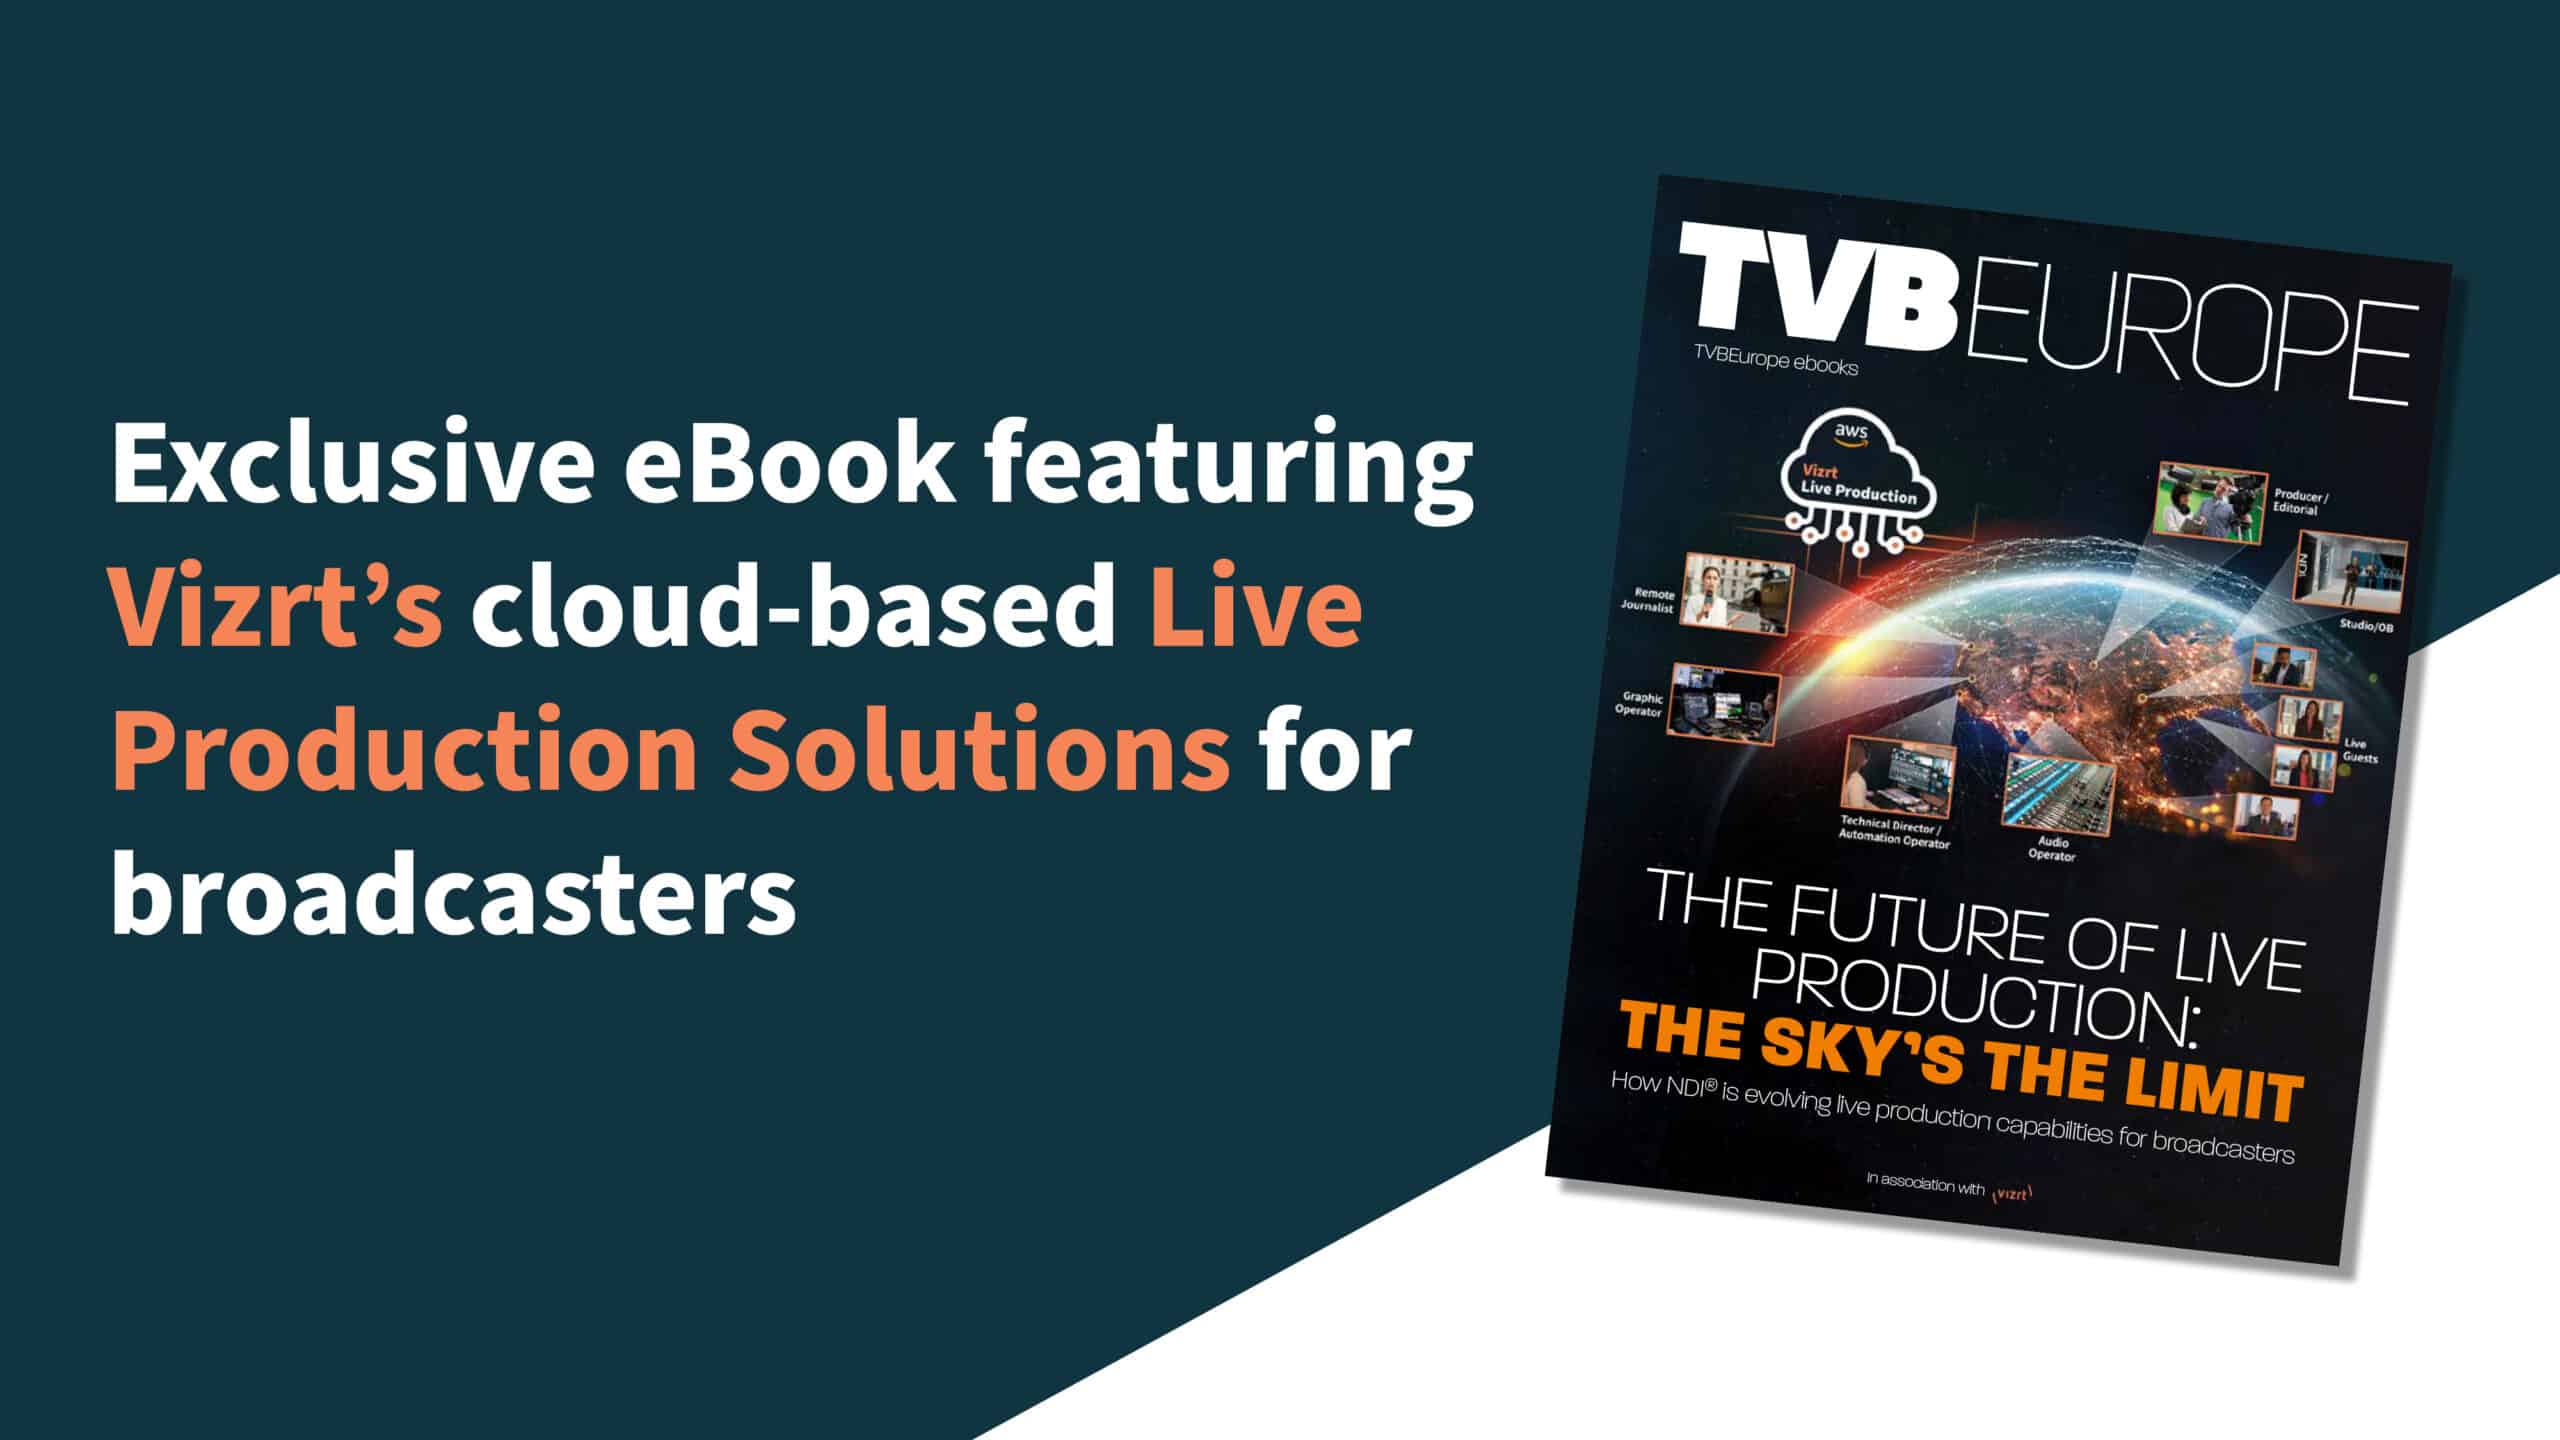 Exclusive eBook featuring Vizrt's cloud-based Live Production Solutions for broadcasters